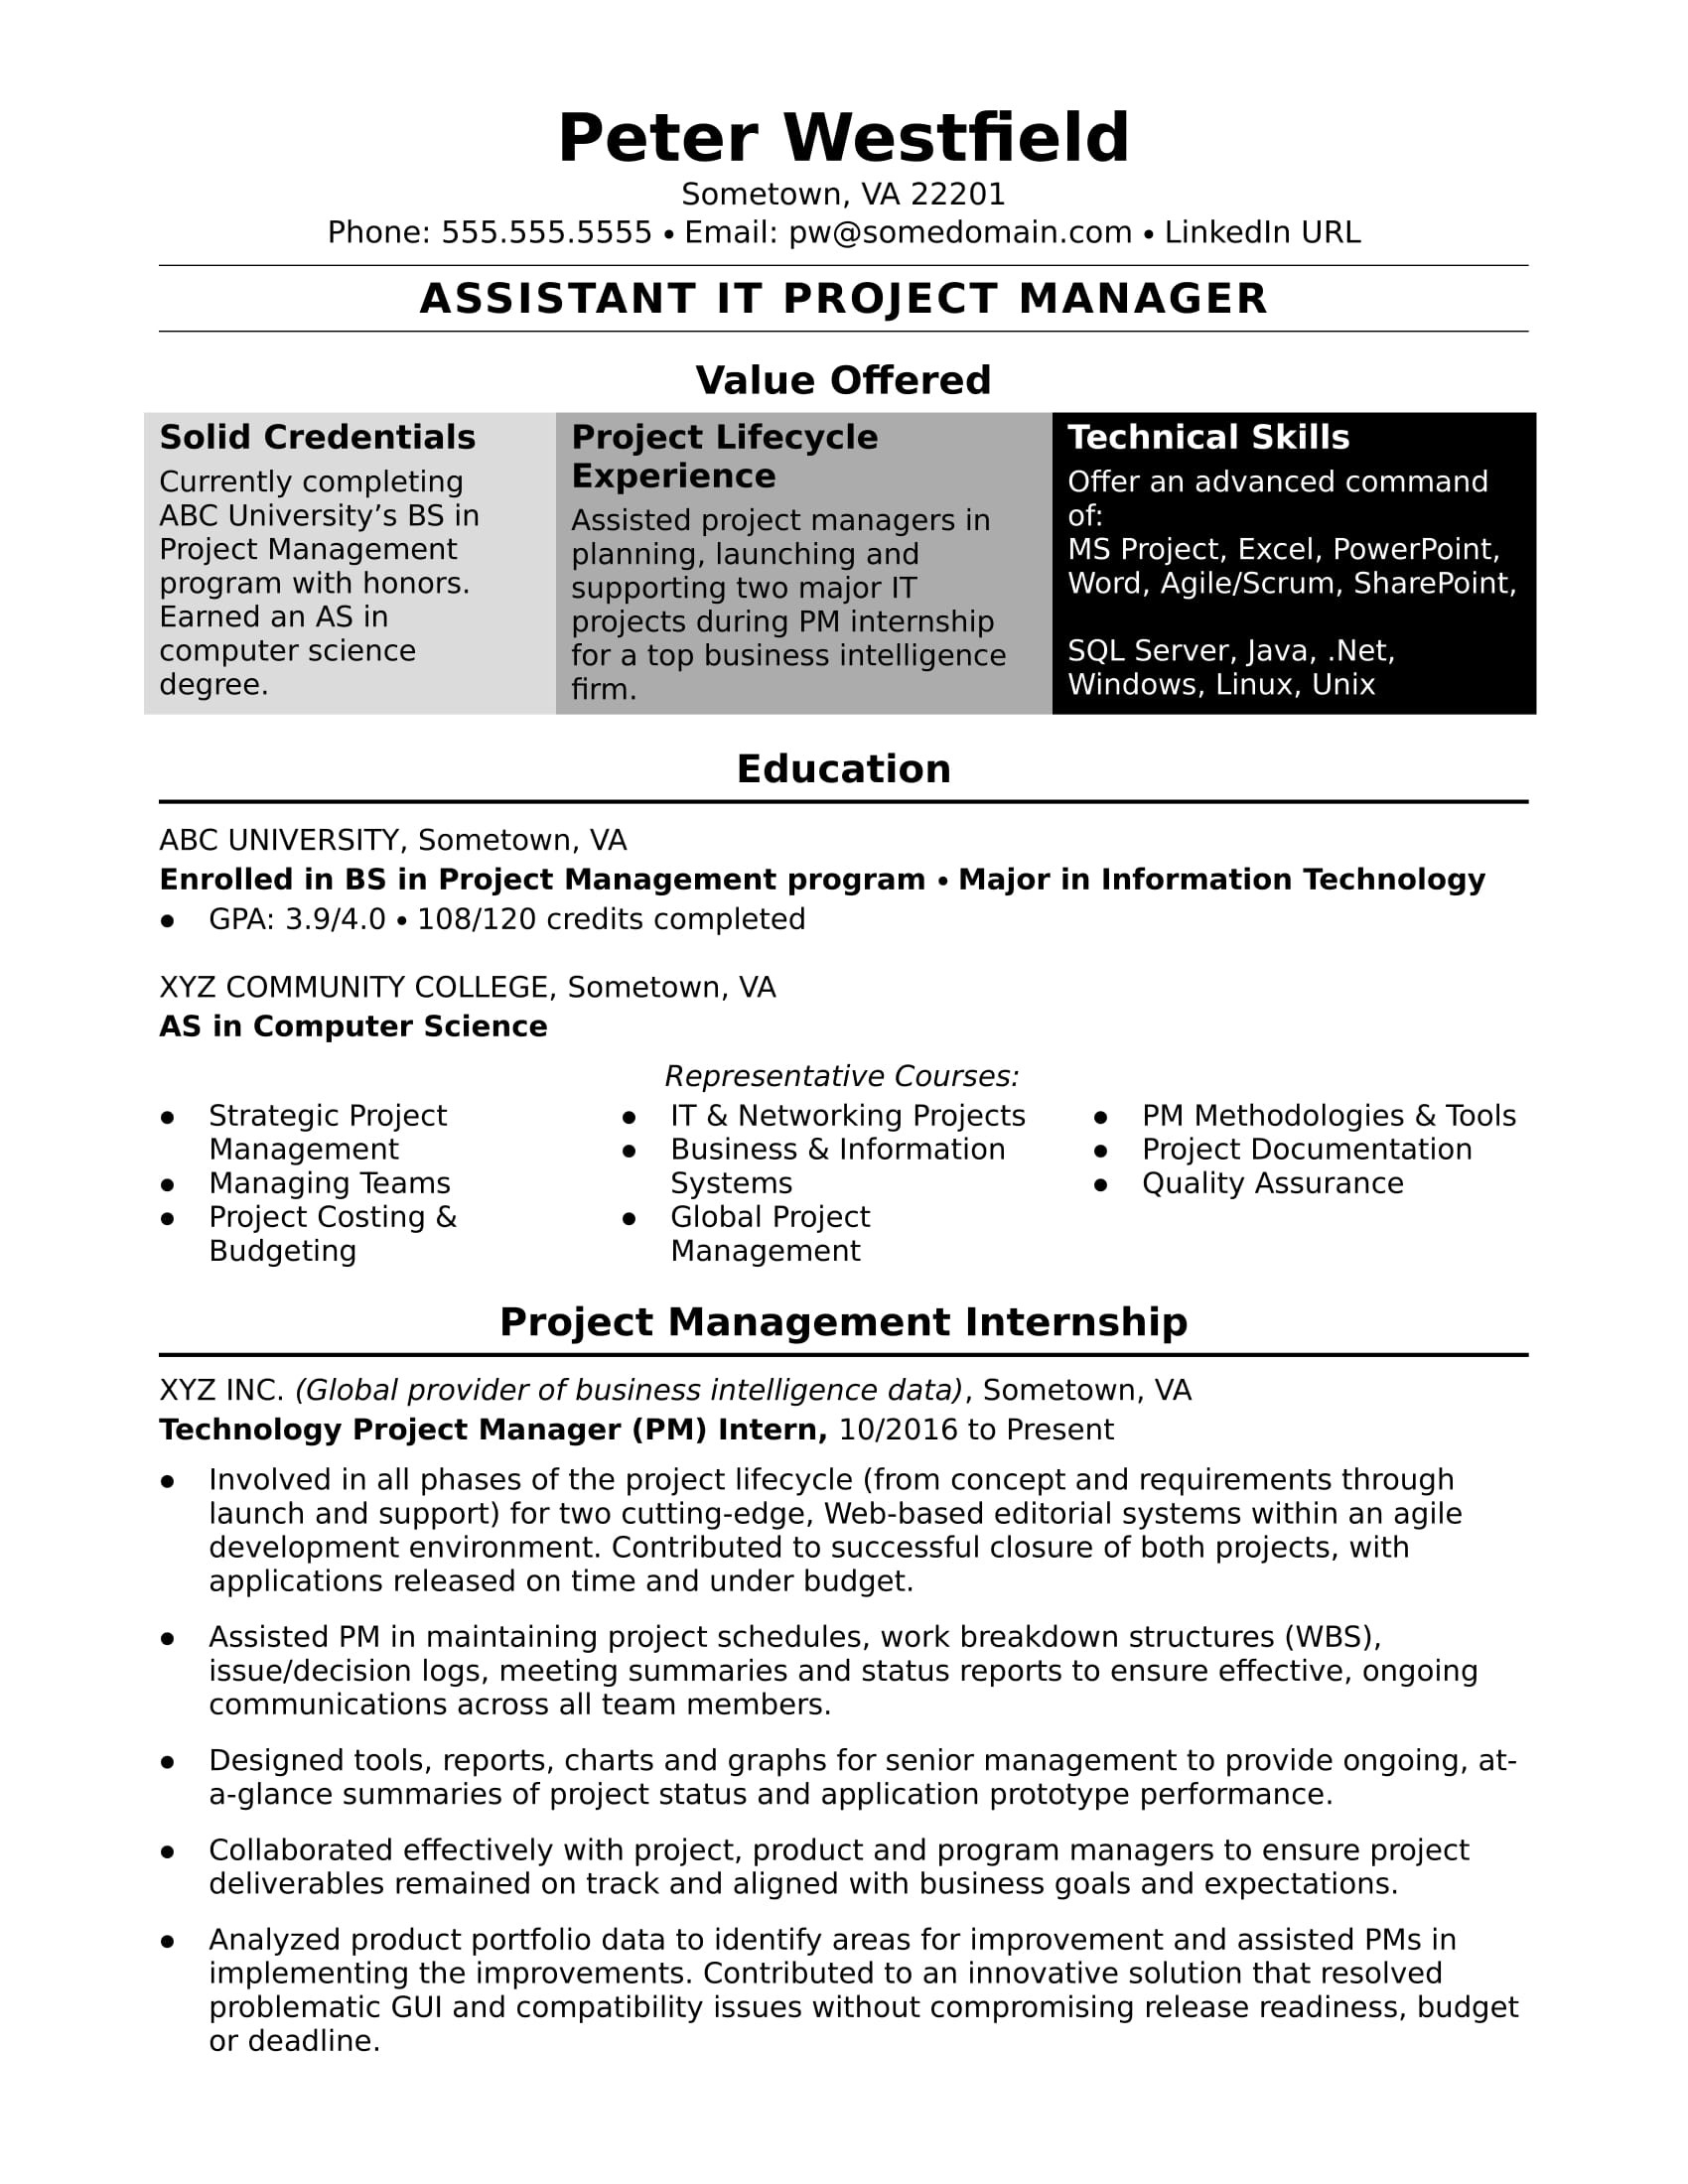 sample resume assistant it project manager